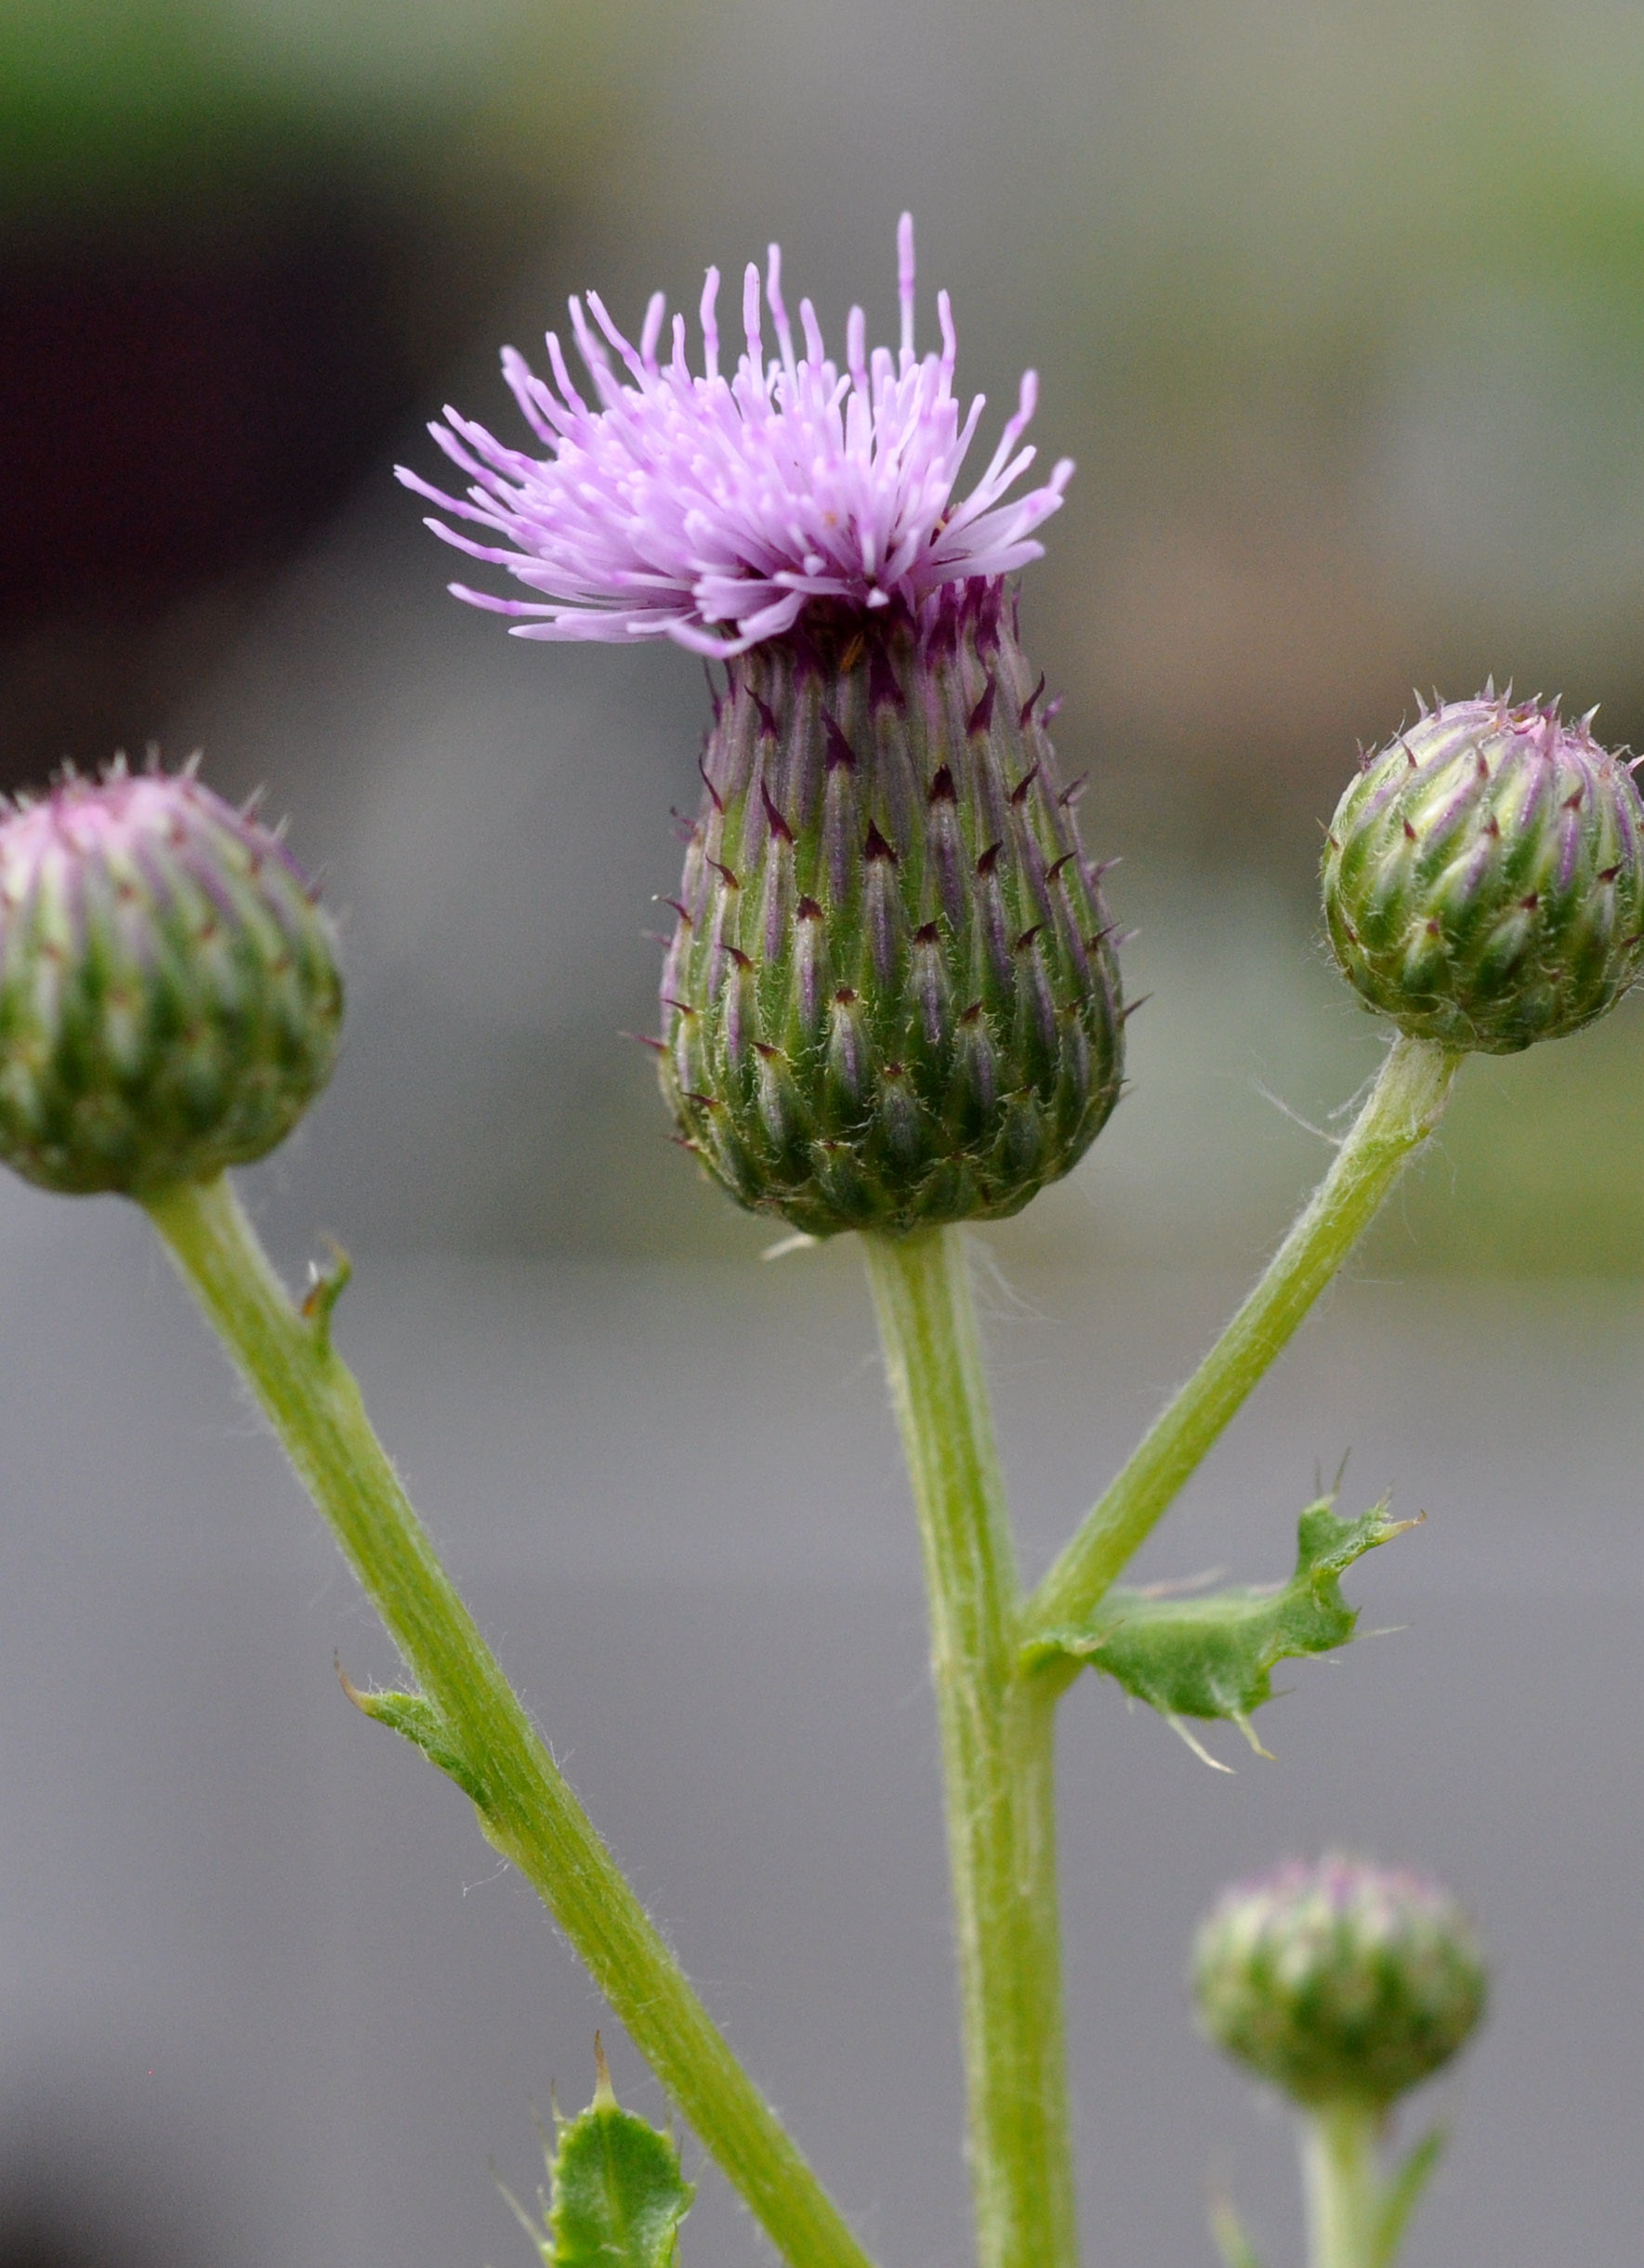 Canada thistle flower and buds